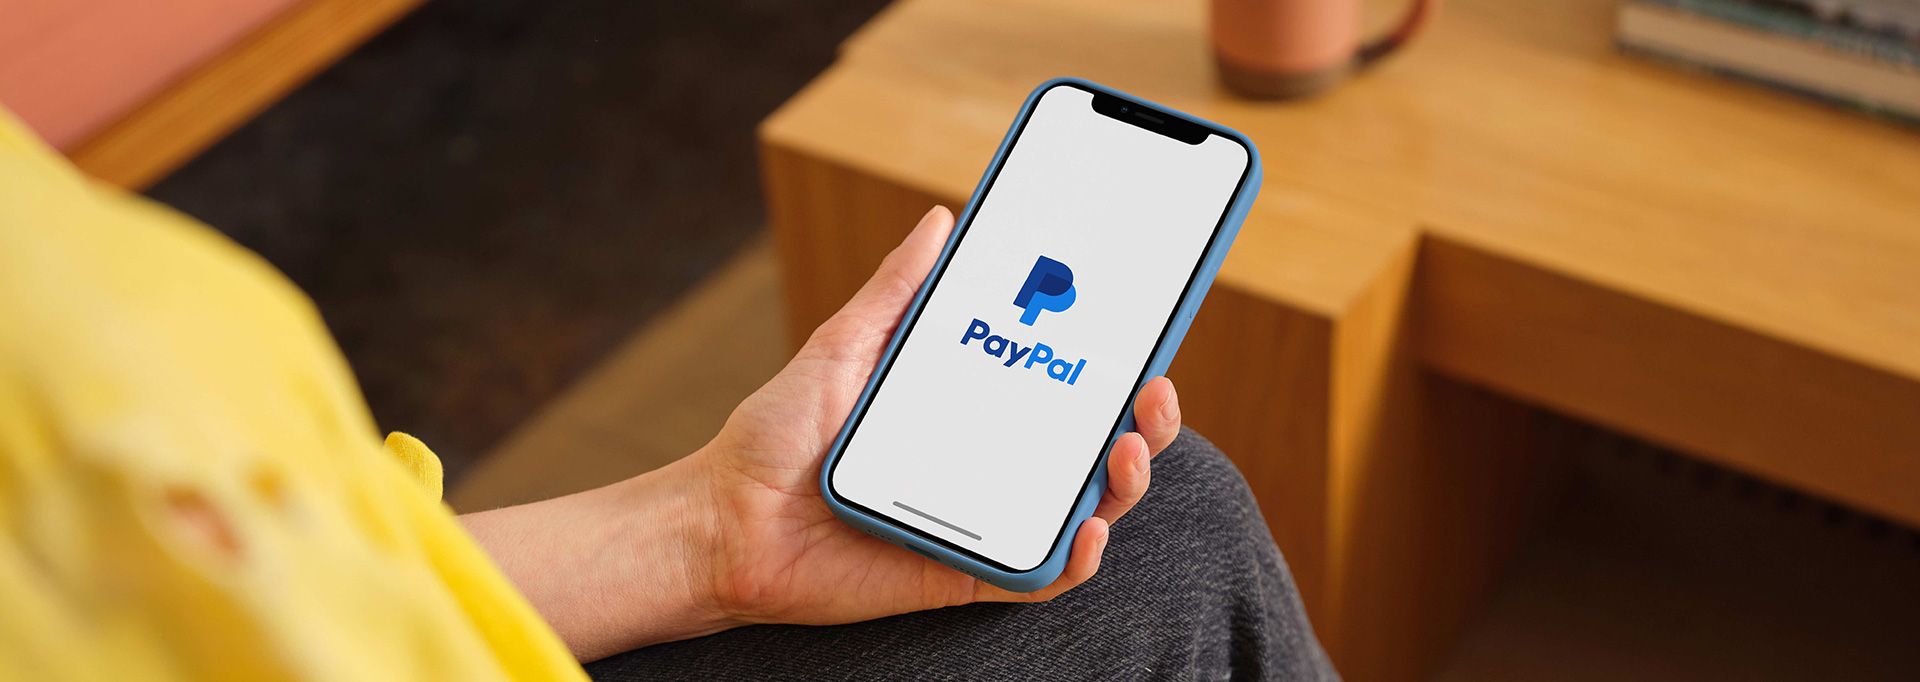 PayPal app on phone in hand